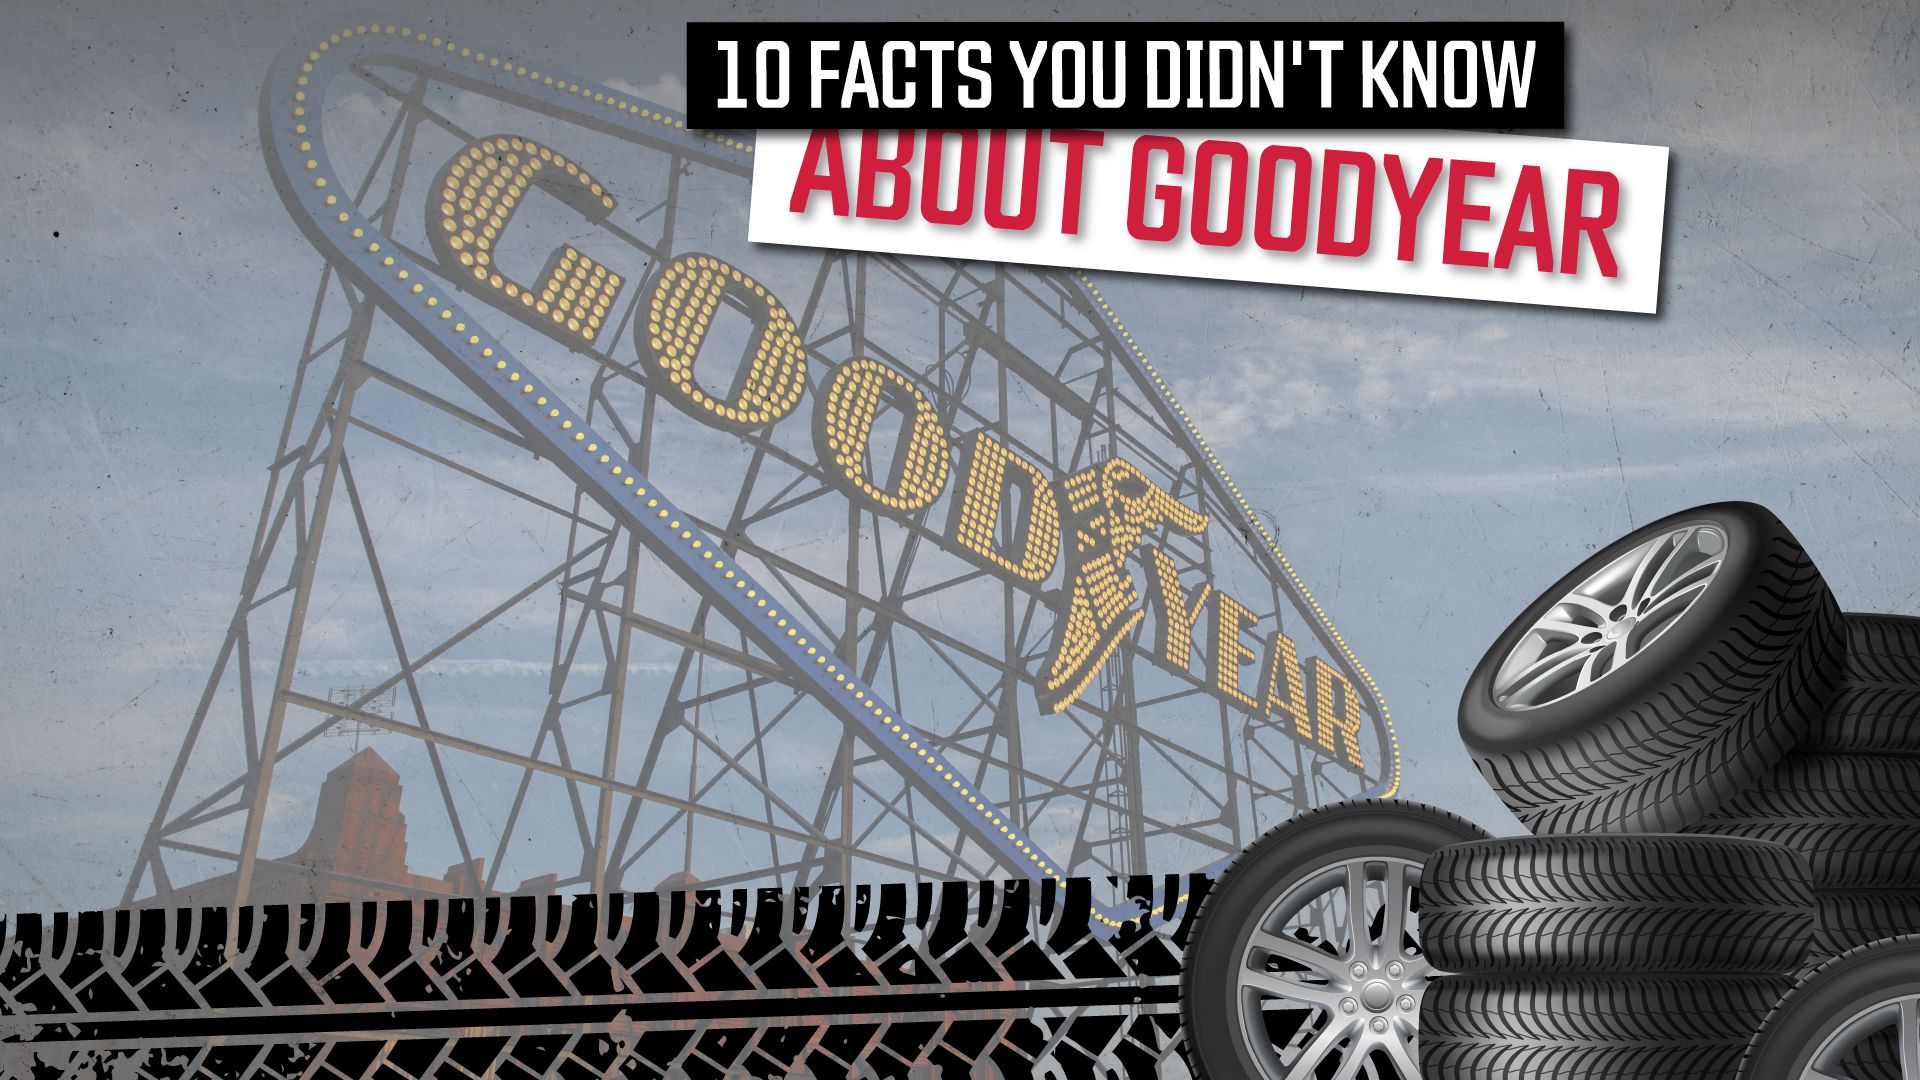 10-Facts-You-Didn't-Know-About-Goodyear